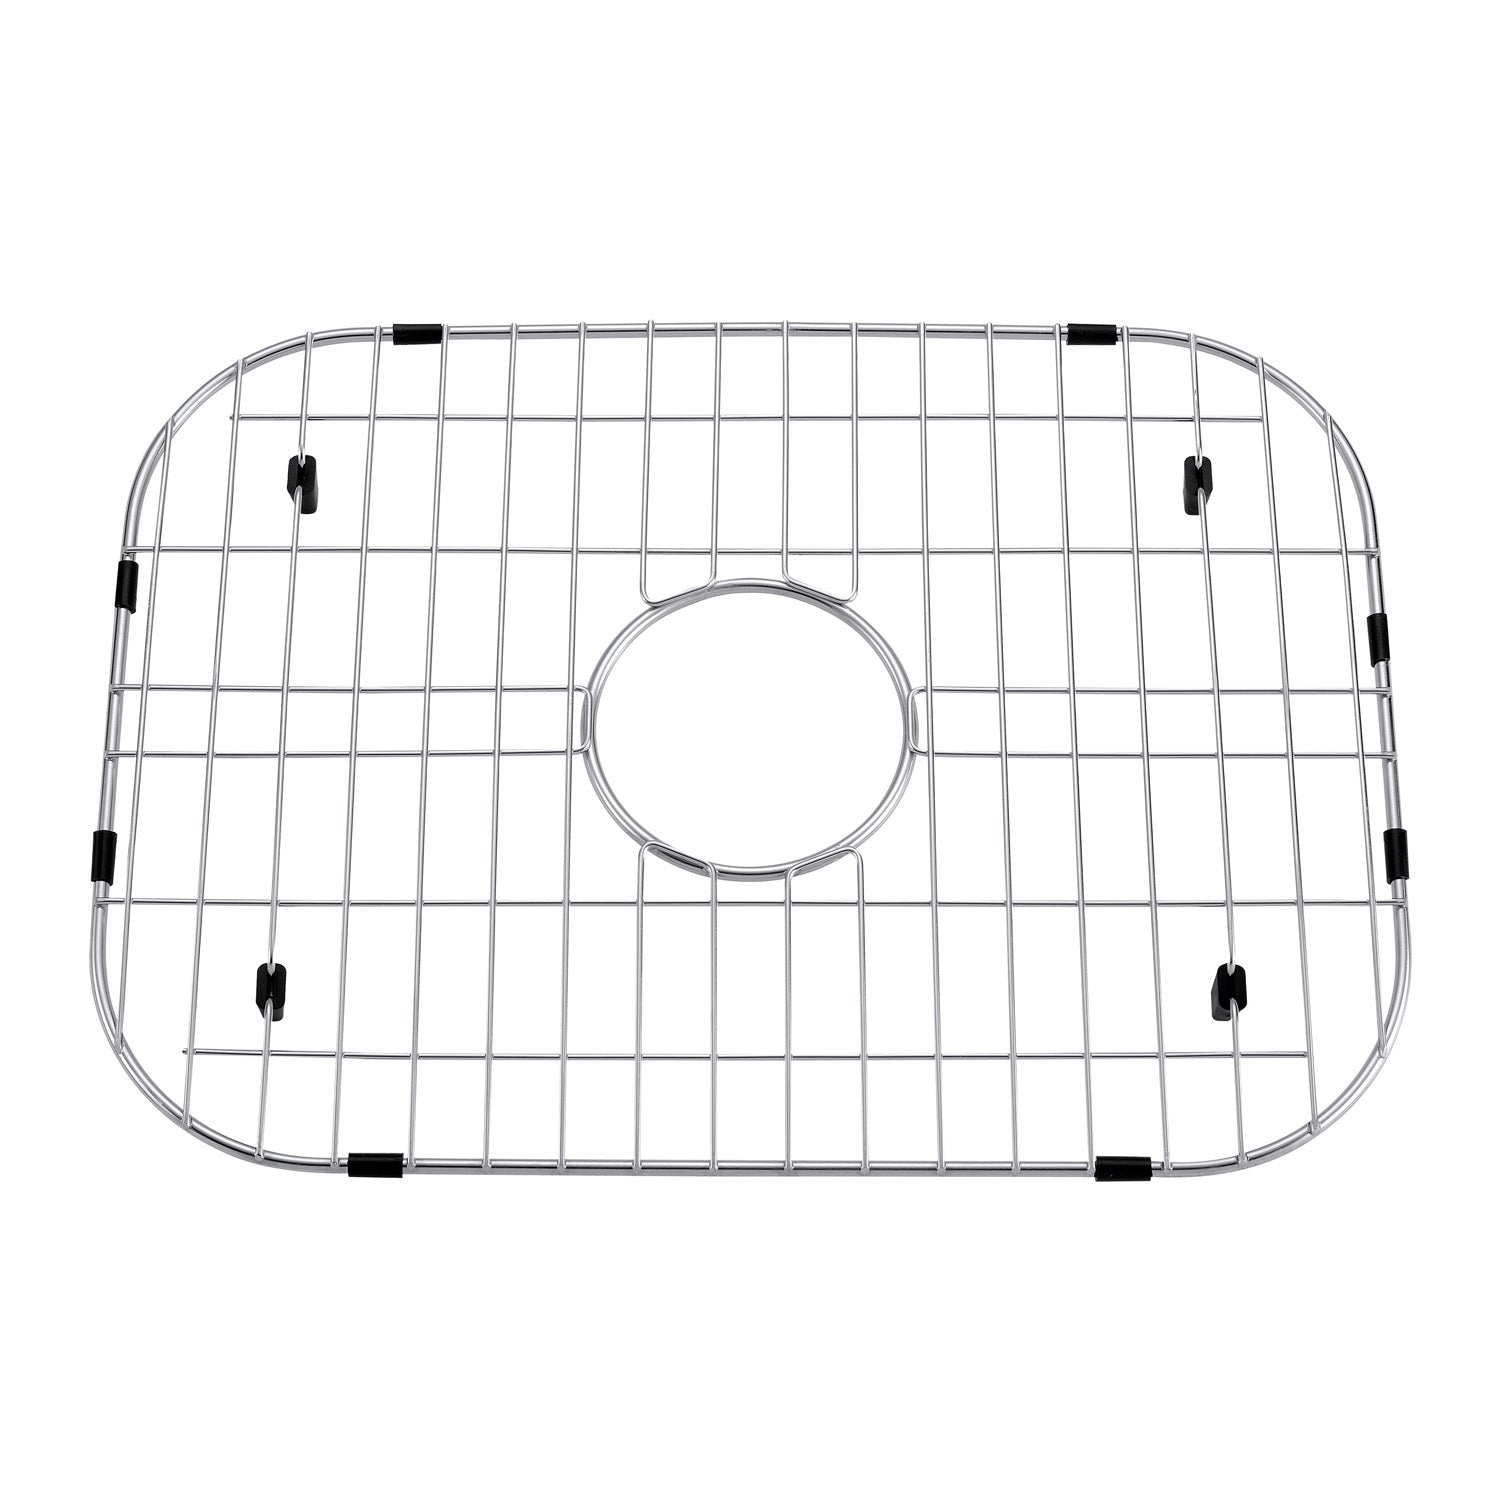 DAX Grid for Kitchen Sink, Stainless Steel Body, Chrome Finish, Compatible with DAX-2317, 19 x 14 Inches (GRID-2317)